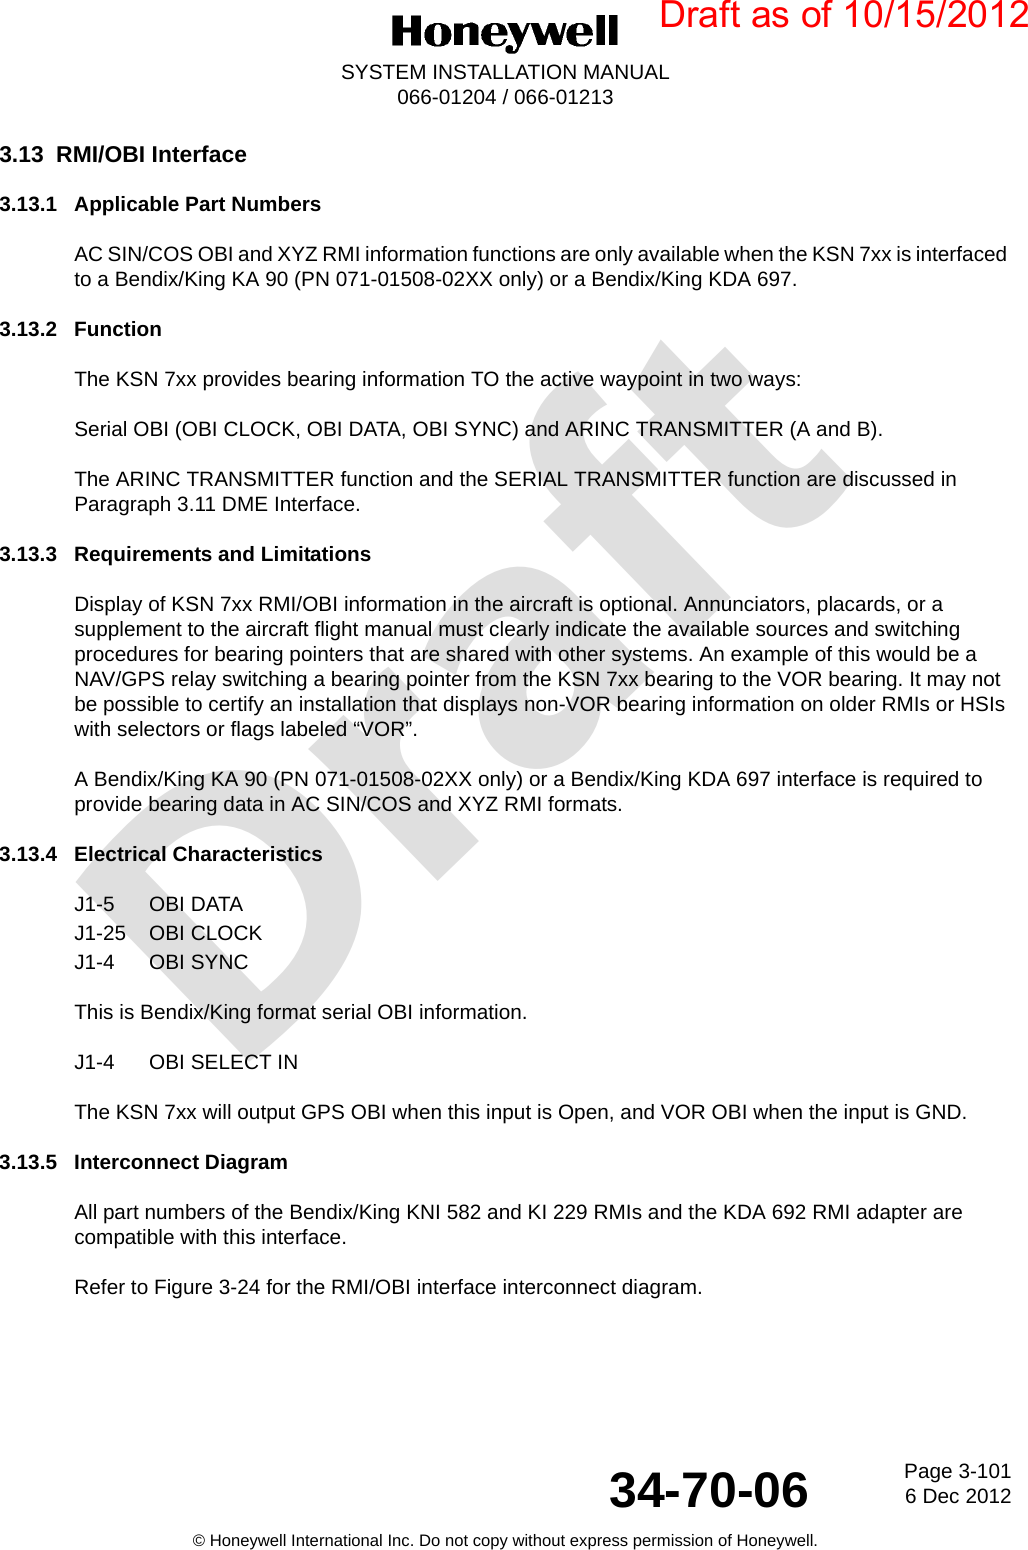 DraftPage 3-1016 Dec 201234-70-06SYSTEM INSTALLATION MANUAL066-01204 / 066-01213© Honeywell International Inc. Do not copy without express permission of Honeywell.3.13 RMI/OBI Interface3.13.1 Applicable Part NumbersAC SIN/COS OBI and XYZ RMI information functions are only available when the KSN 7xx is interfaced to a Bendix/King KA 90 (PN 071-01508-02XX only) or a Bendix/King KDA 697.3.13.2 FunctionThe KSN 7xx provides bearing information TO the active waypoint in two ways:Serial OBI (OBI CLOCK, OBI DATA, OBI SYNC) and ARINC TRANSMITTER (A and B).The ARINC TRANSMITTER function and the SERIAL TRANSMITTER function are discussed in Paragraph 3.11 DME Interface.3.13.3 Requirements and LimitationsDisplay of KSN 7xx RMI/OBI information in the aircraft is optional. Annunciators, placards, or a supplement to the aircraft flight manual must clearly indicate the available sources and switching procedures for bearing pointers that are shared with other systems. An example of this would be a NAV/GPS relay switching a bearing pointer from the KSN 7xx bearing to the VOR bearing. It may not be possible to certify an installation that displays non-VOR bearing information on older RMIs or HSIs with selectors or flags labeled “VOR”.A Bendix/King KA 90 (PN 071-01508-02XX only) or a Bendix/King KDA 697 interface is required to provide bearing data in AC SIN/COS and XYZ RMI formats.3.13.4 Electrical CharacteristicsJ1-5 OBI DATAJ1-25 OBI CLOCKJ1-4 OBI SYNCThis is Bendix/King format serial OBI information.J1-4 OBI SELECT INThe KSN 7xx will output GPS OBI when this input is Open, and VOR OBI when the input is GND.3.13.5 Interconnect DiagramAll part numbers of the Bendix/King KNI 582 and KI 229 RMIs and the KDA 692 RMI adapter are compatible with this interface.Refer to Figure 3-24 for the RMI/OBI interface interconnect diagram.Draft as of 10/15/2012